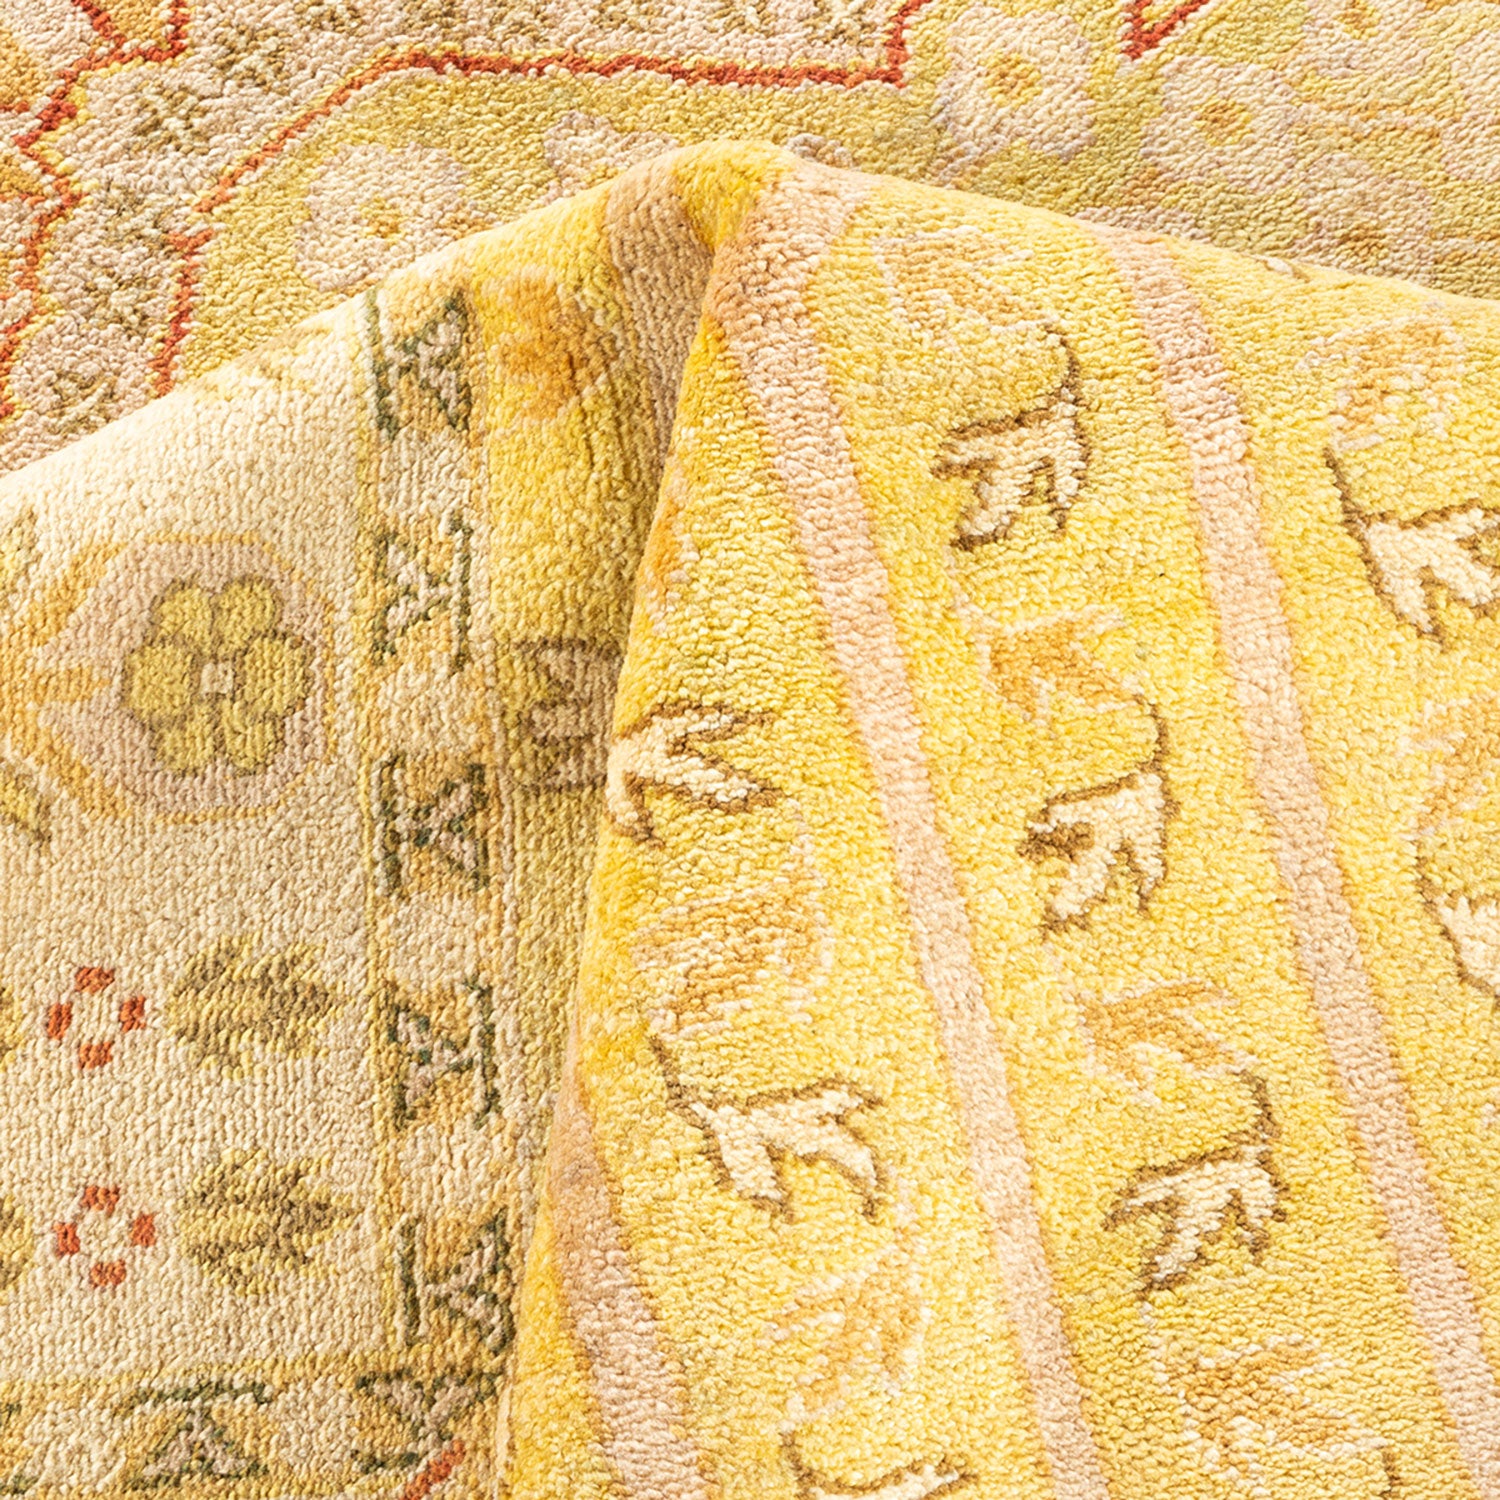 Close-up view of a folded, patterned textile with floral motifs.